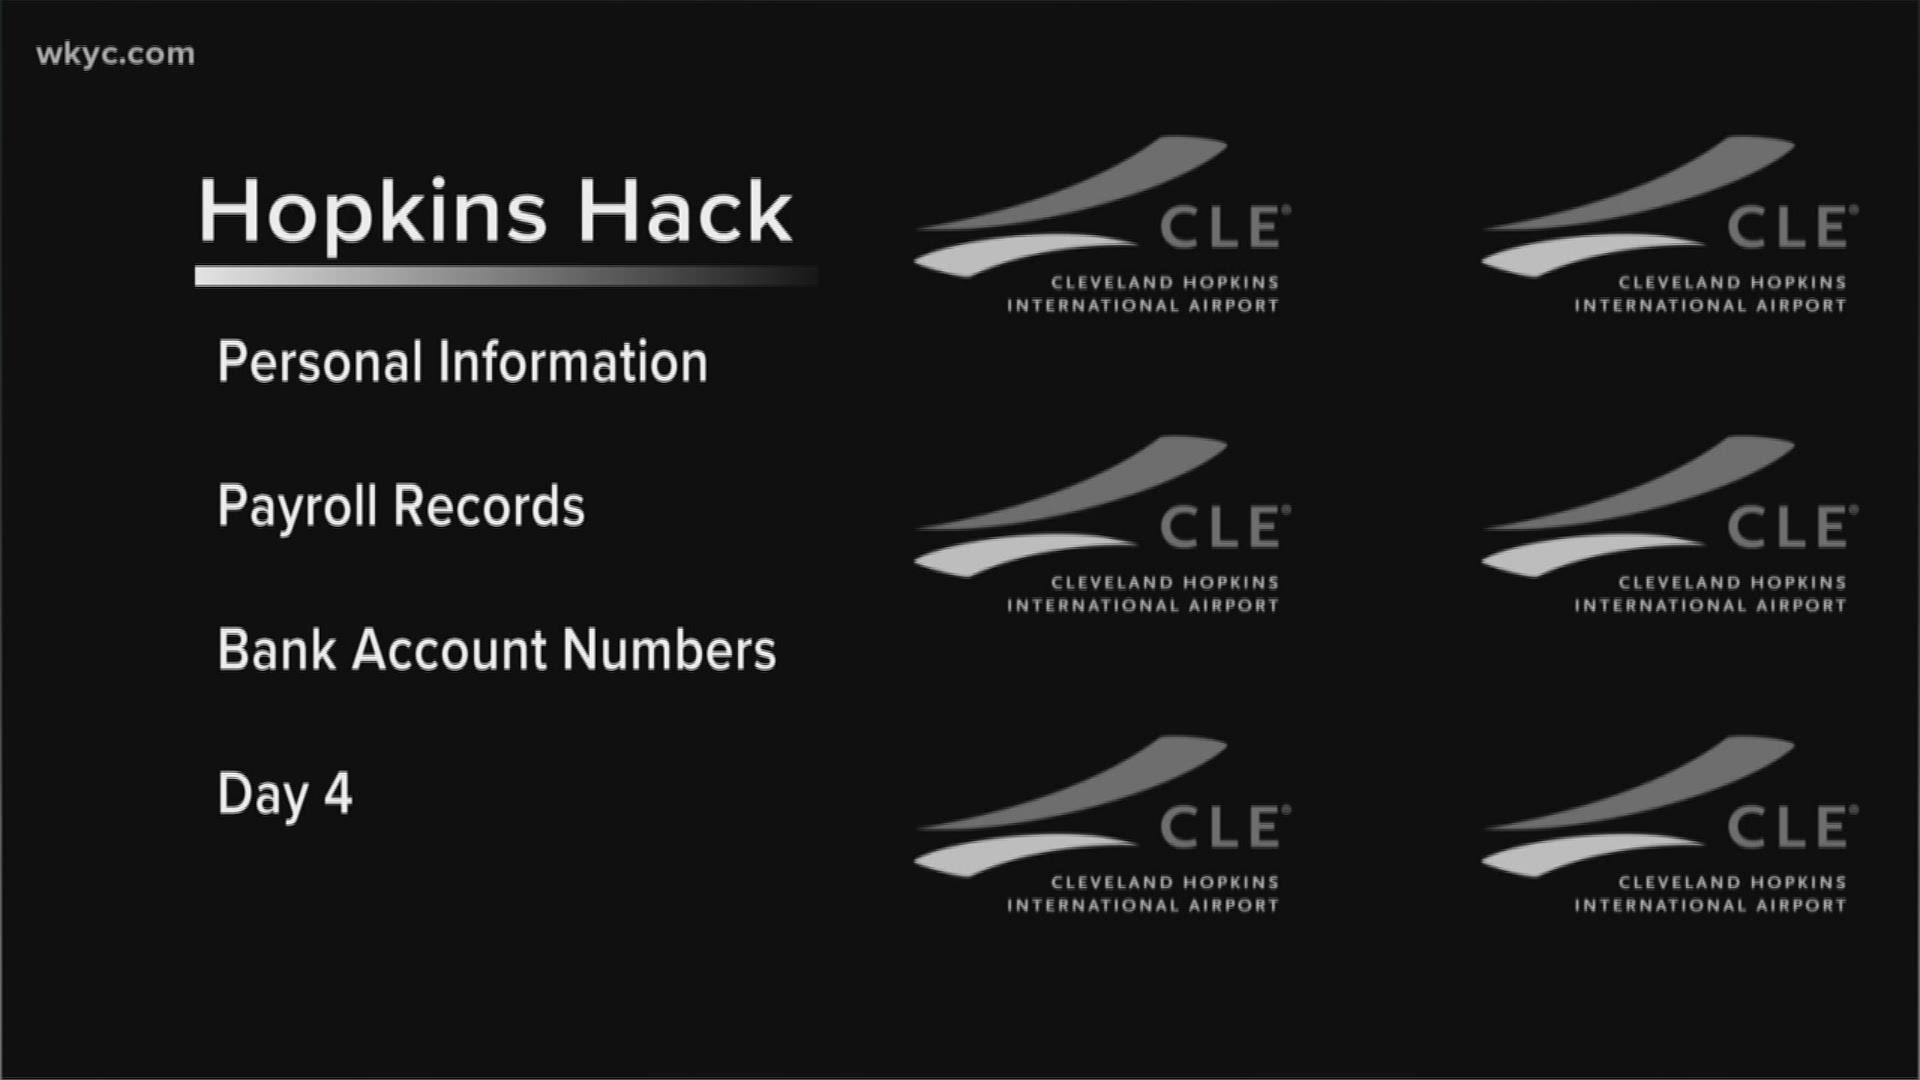 Hacking at Cleveland Hopkins Airport remains under investigation